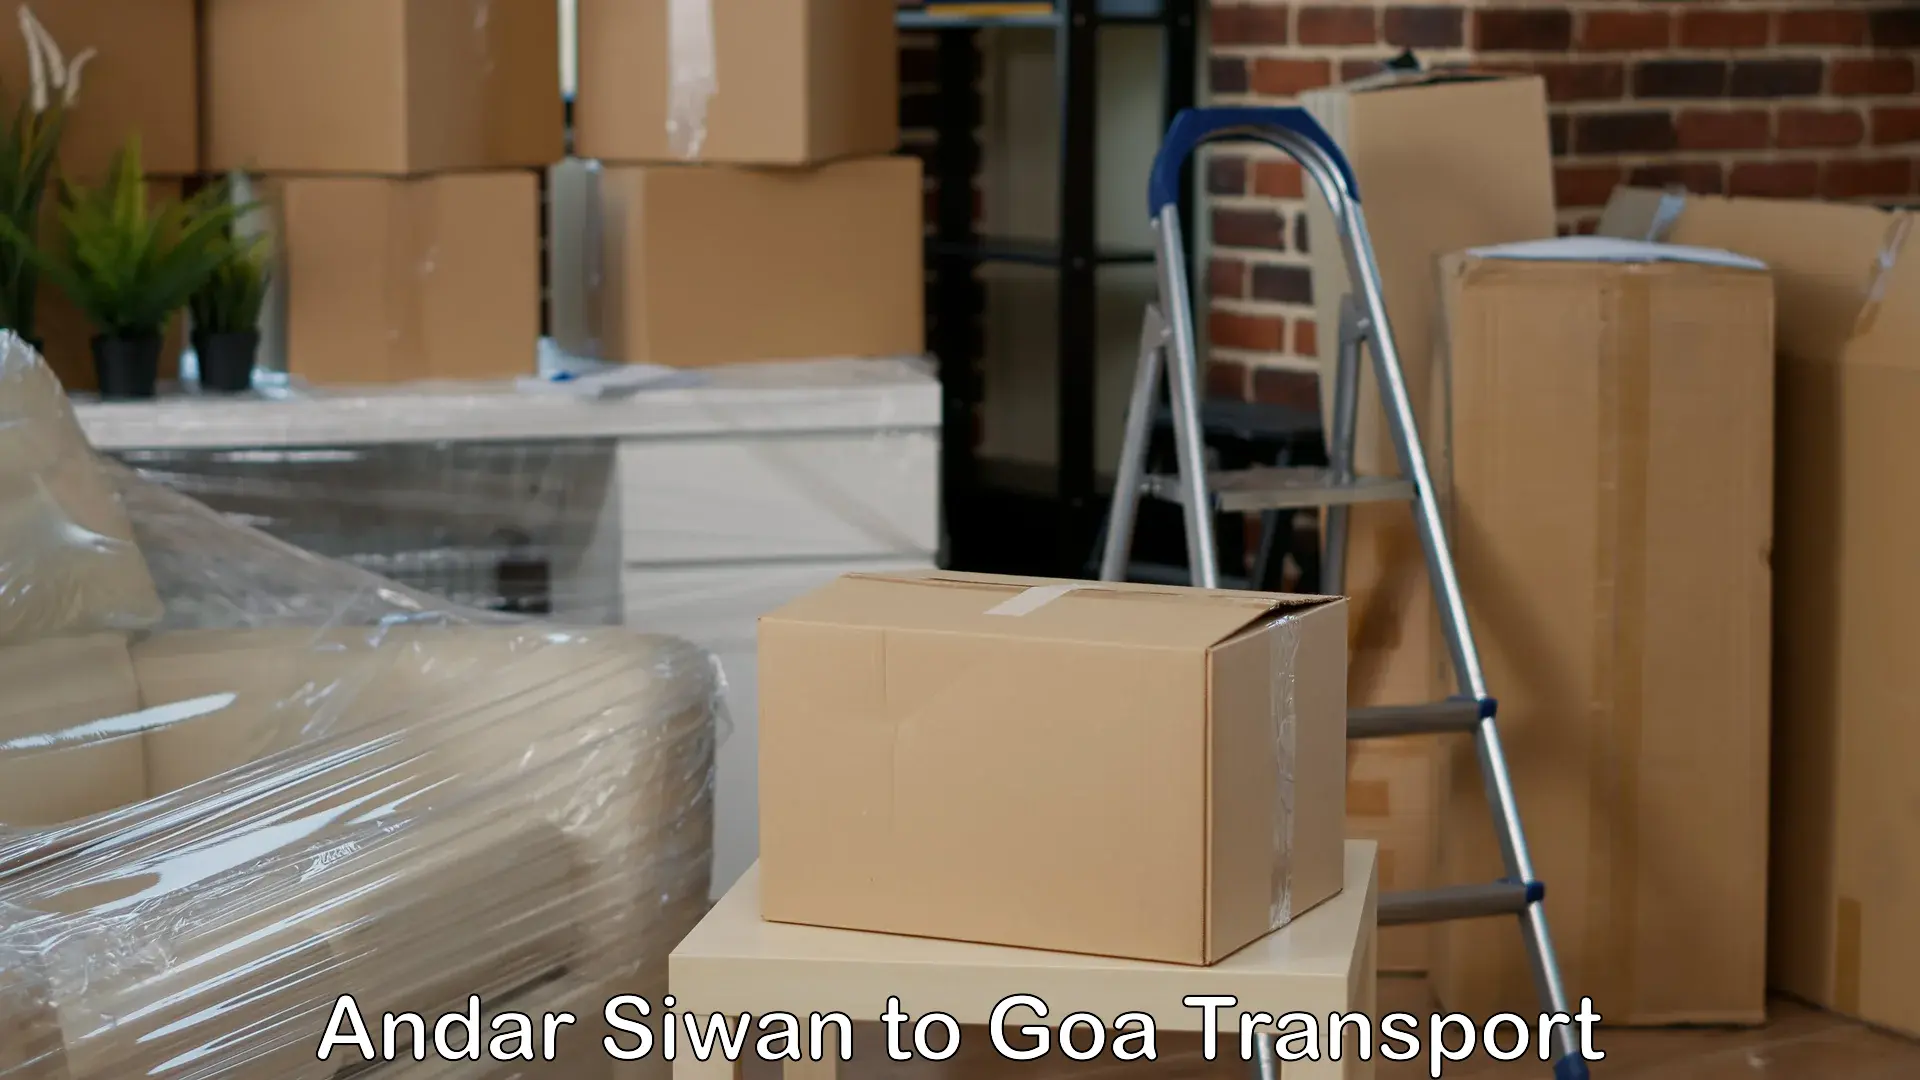 Interstate transport services Andar Siwan to Goa University